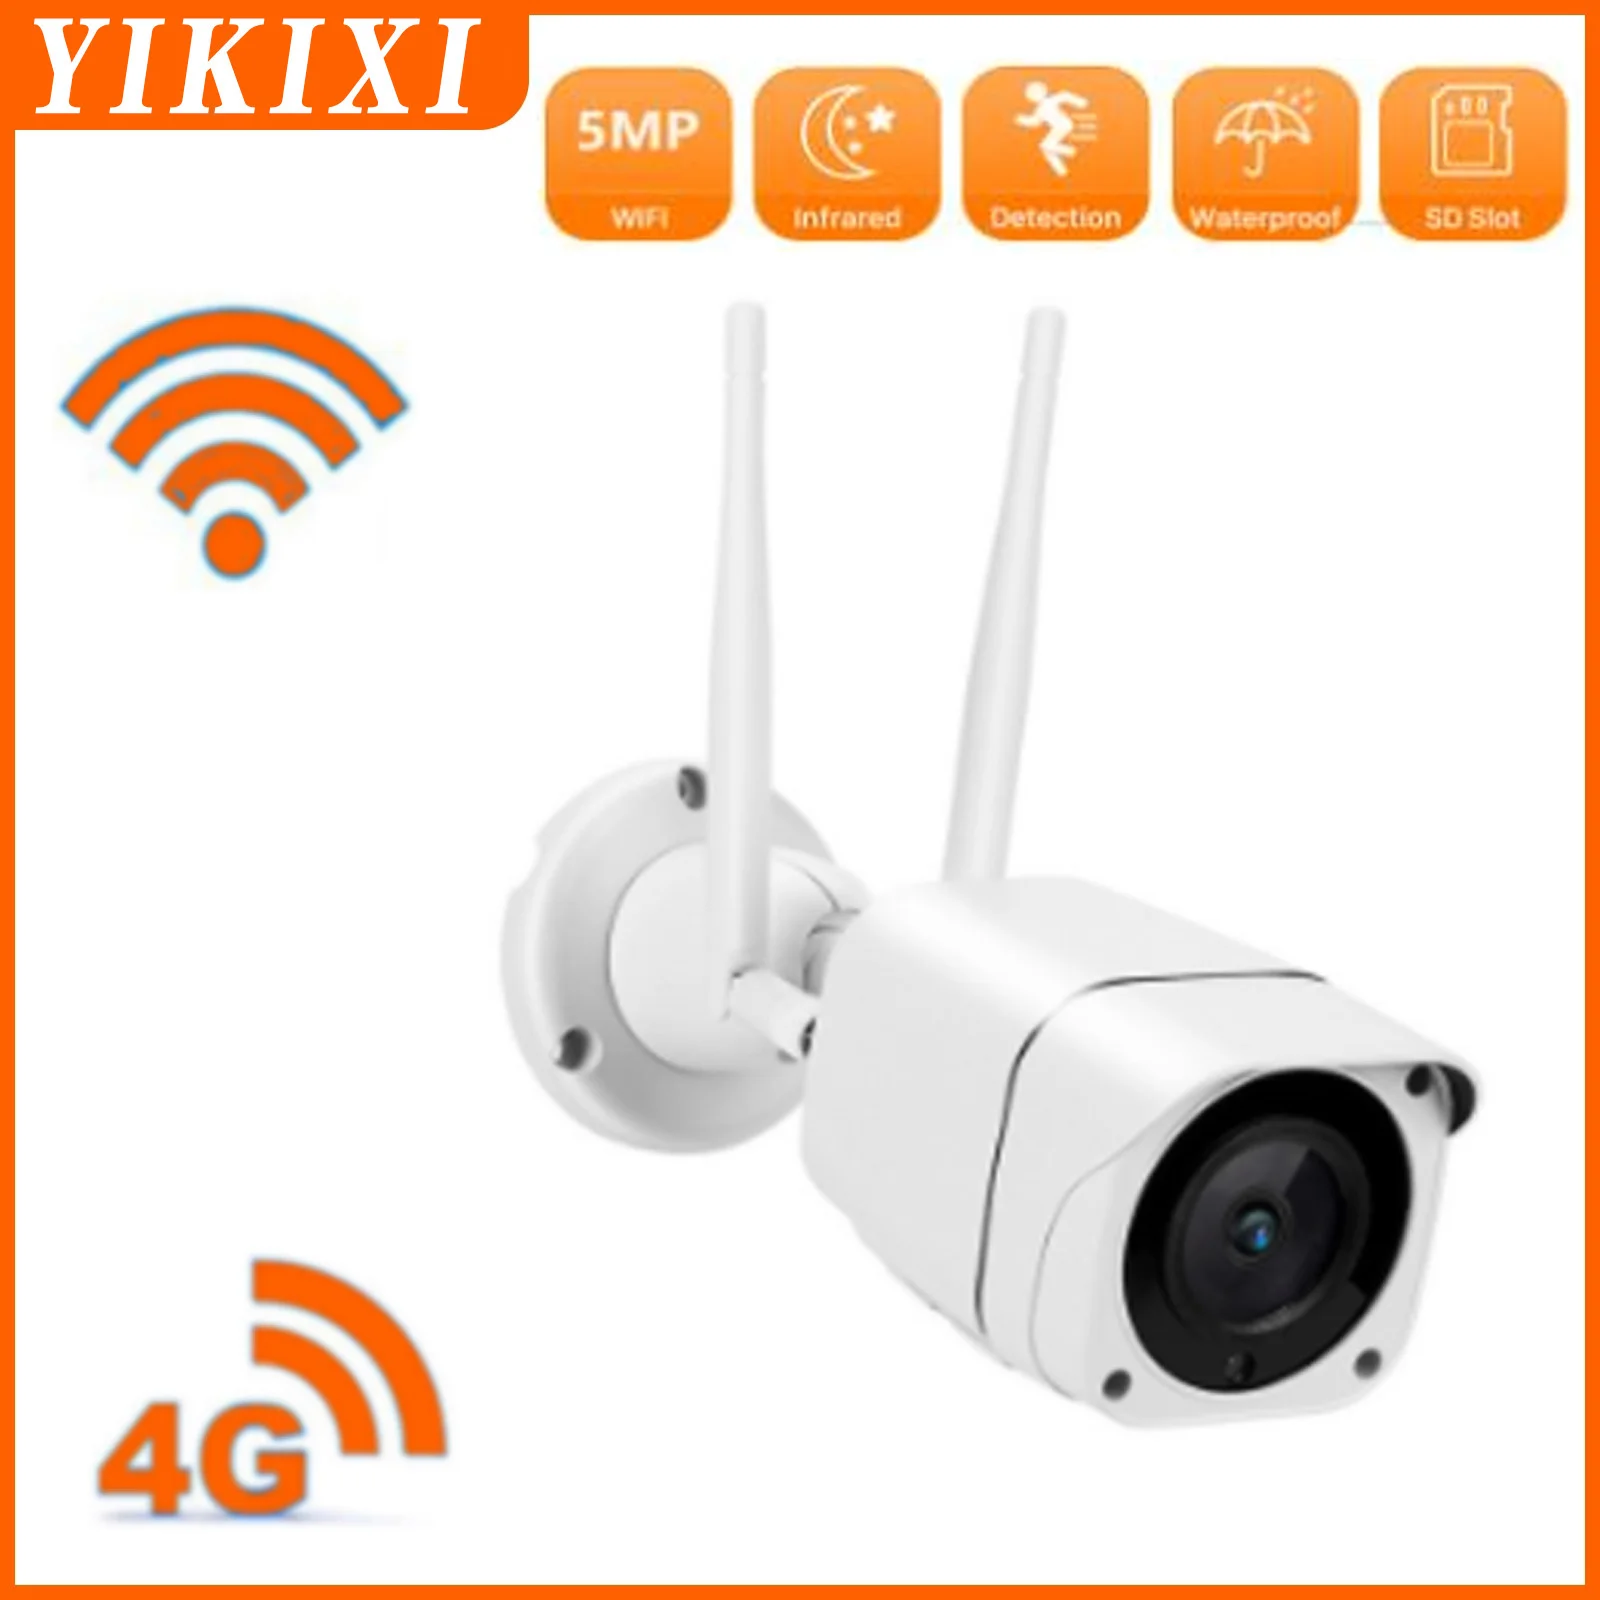 

5MP 4G Sim Card Video Surveillance Camera 2.4G WIFI Security Protection Outdoor Vide Kamera Two-way voice waterproof ip cam